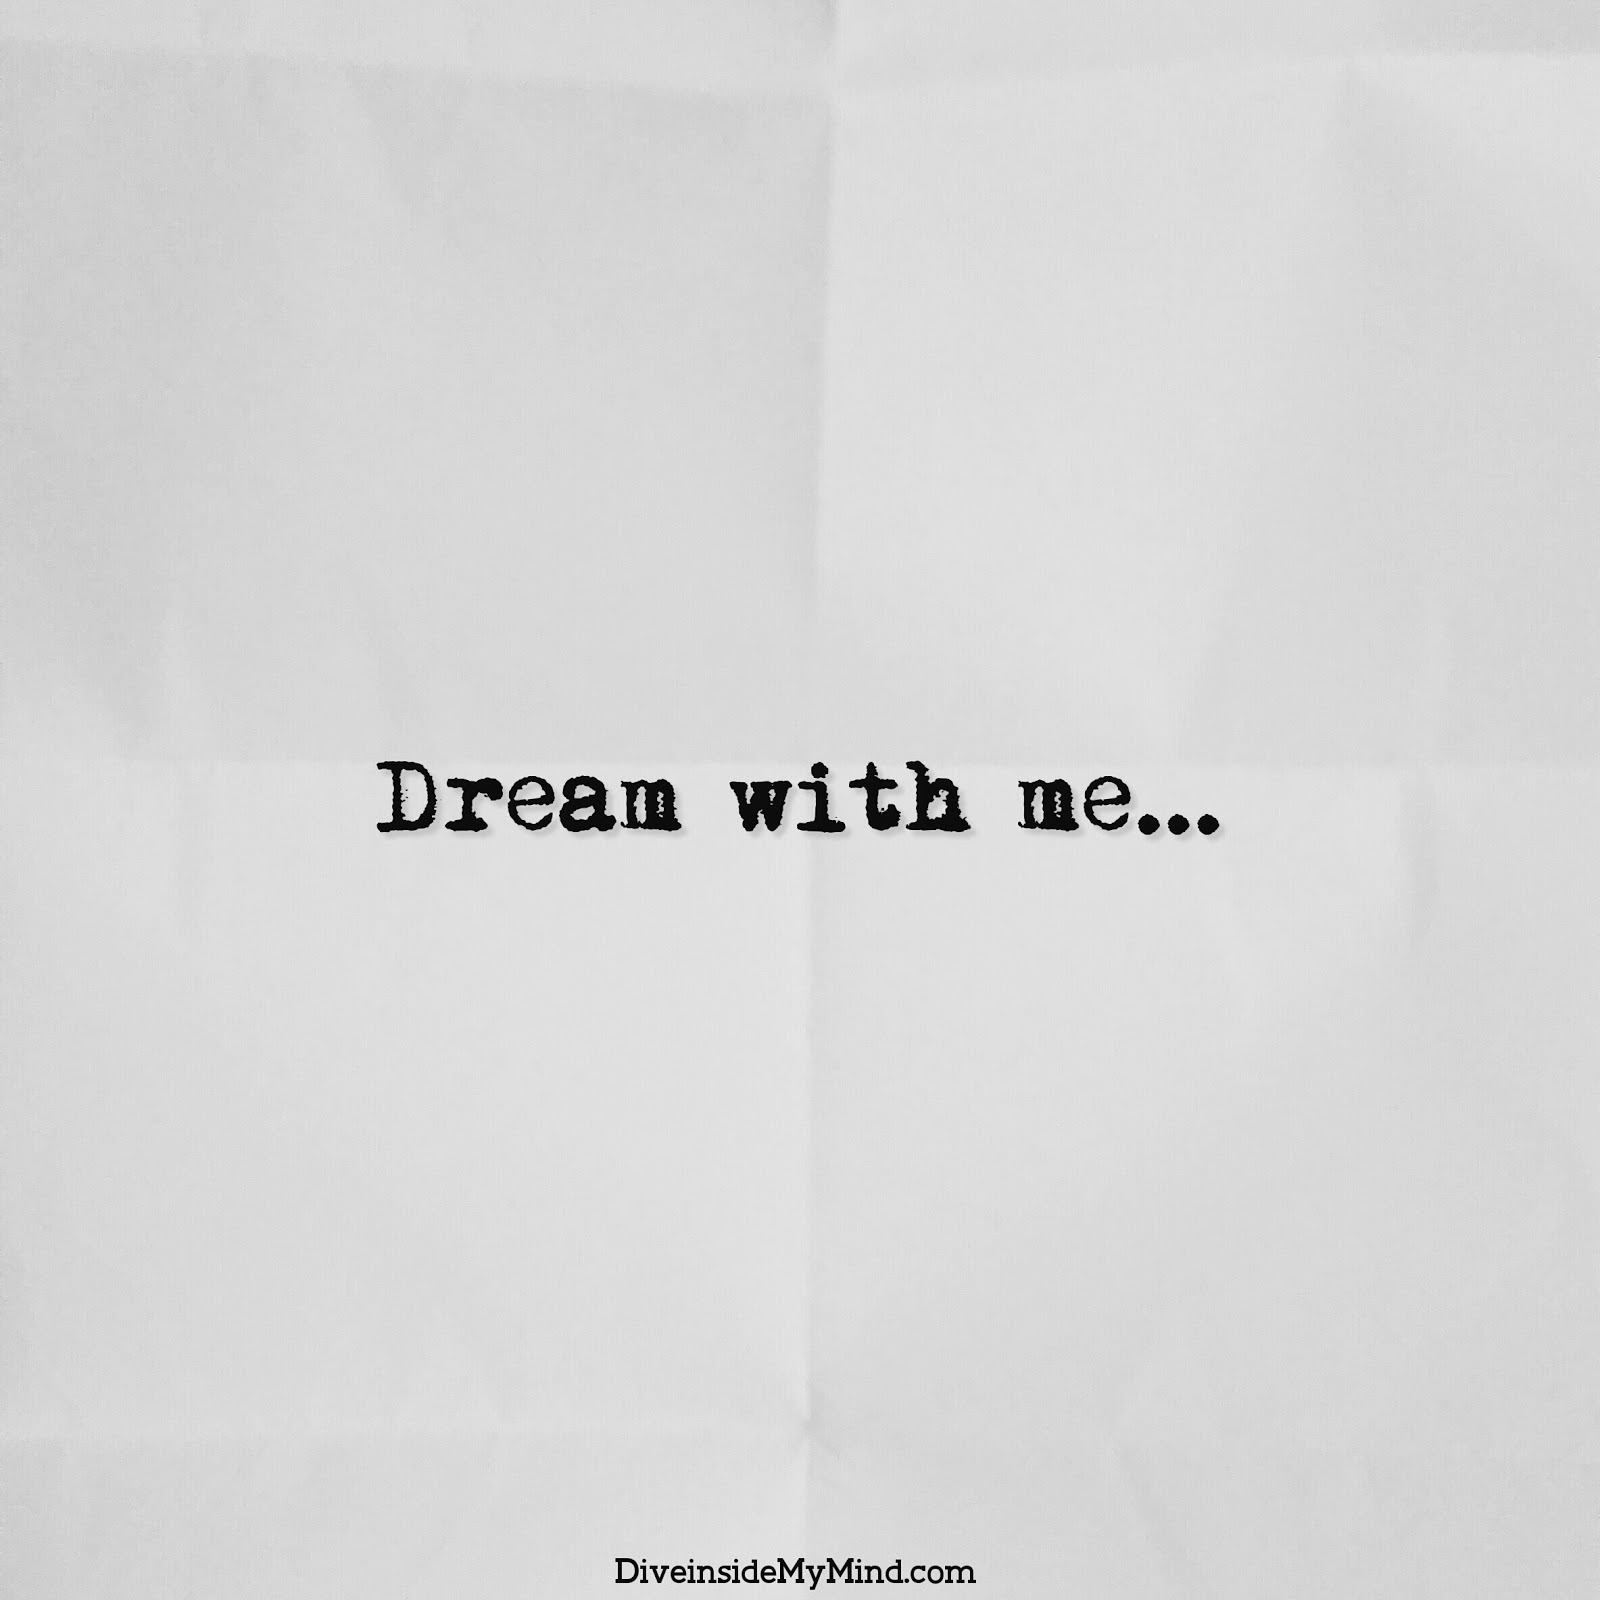 Dive inside My Mind: Dream With Me